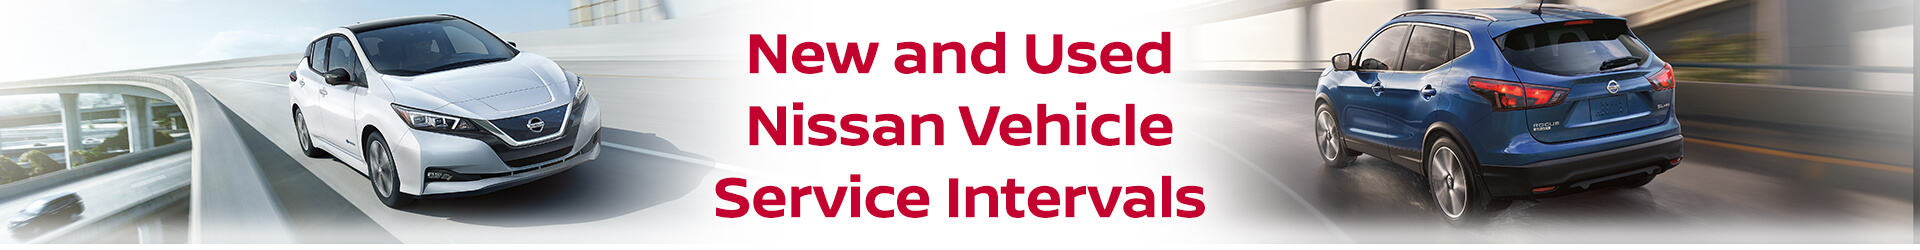 New and Used Nissan Vehicle Service Intervals